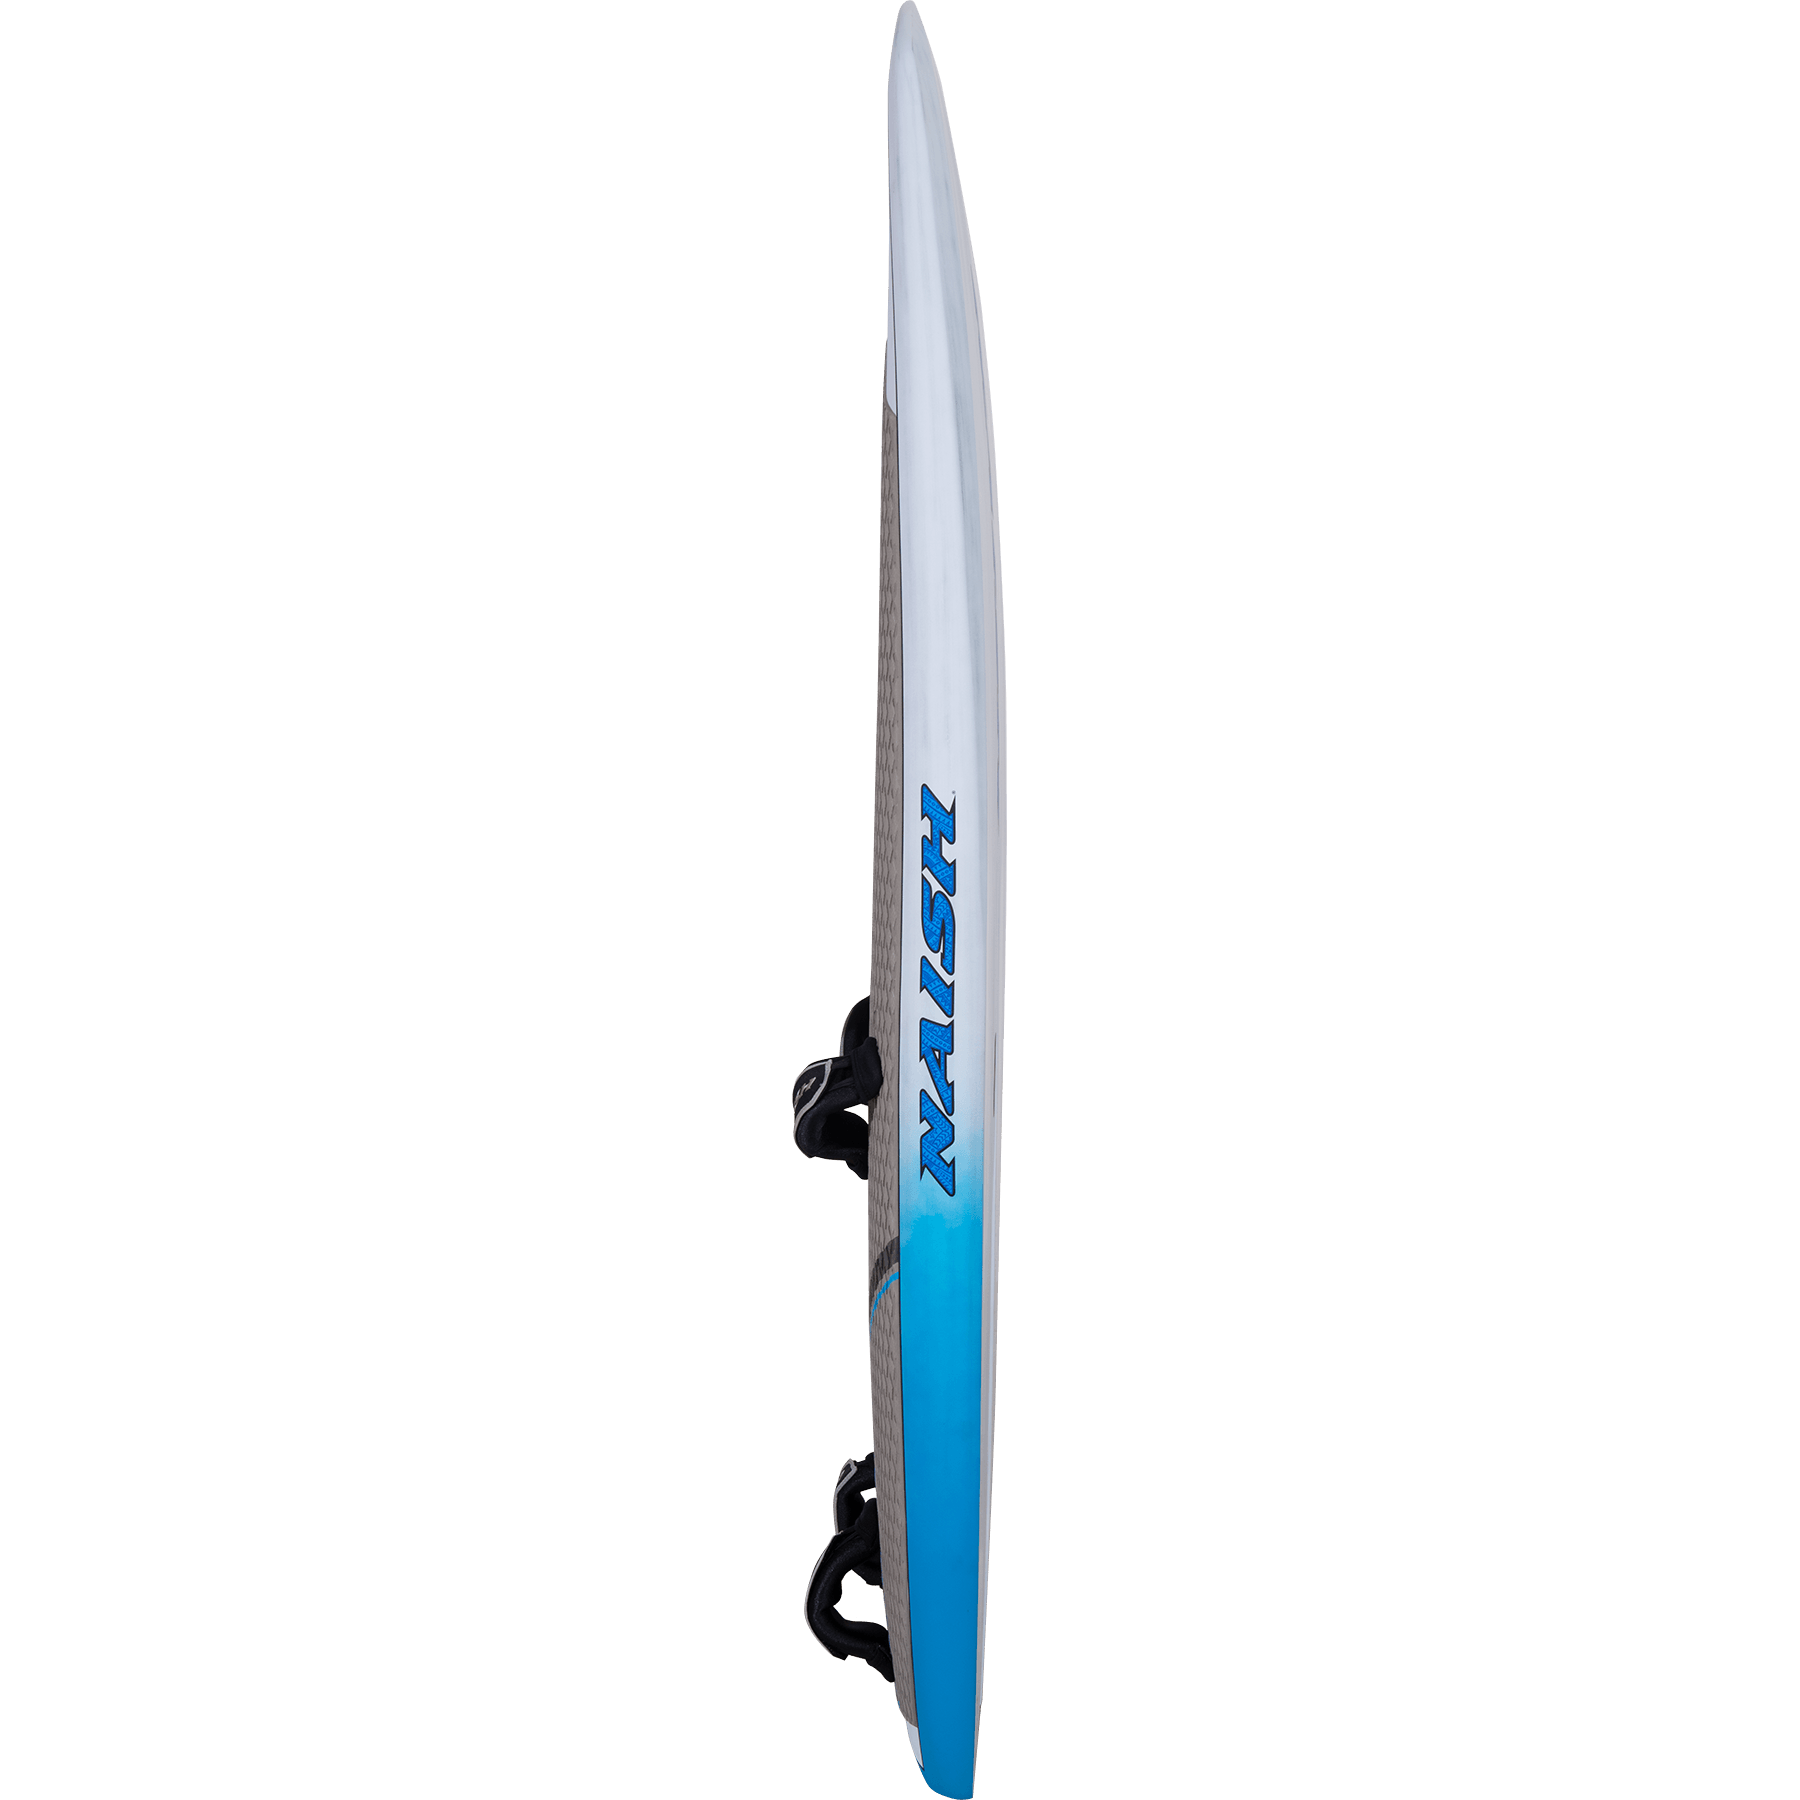 Windfoil Crossover - Naish.com